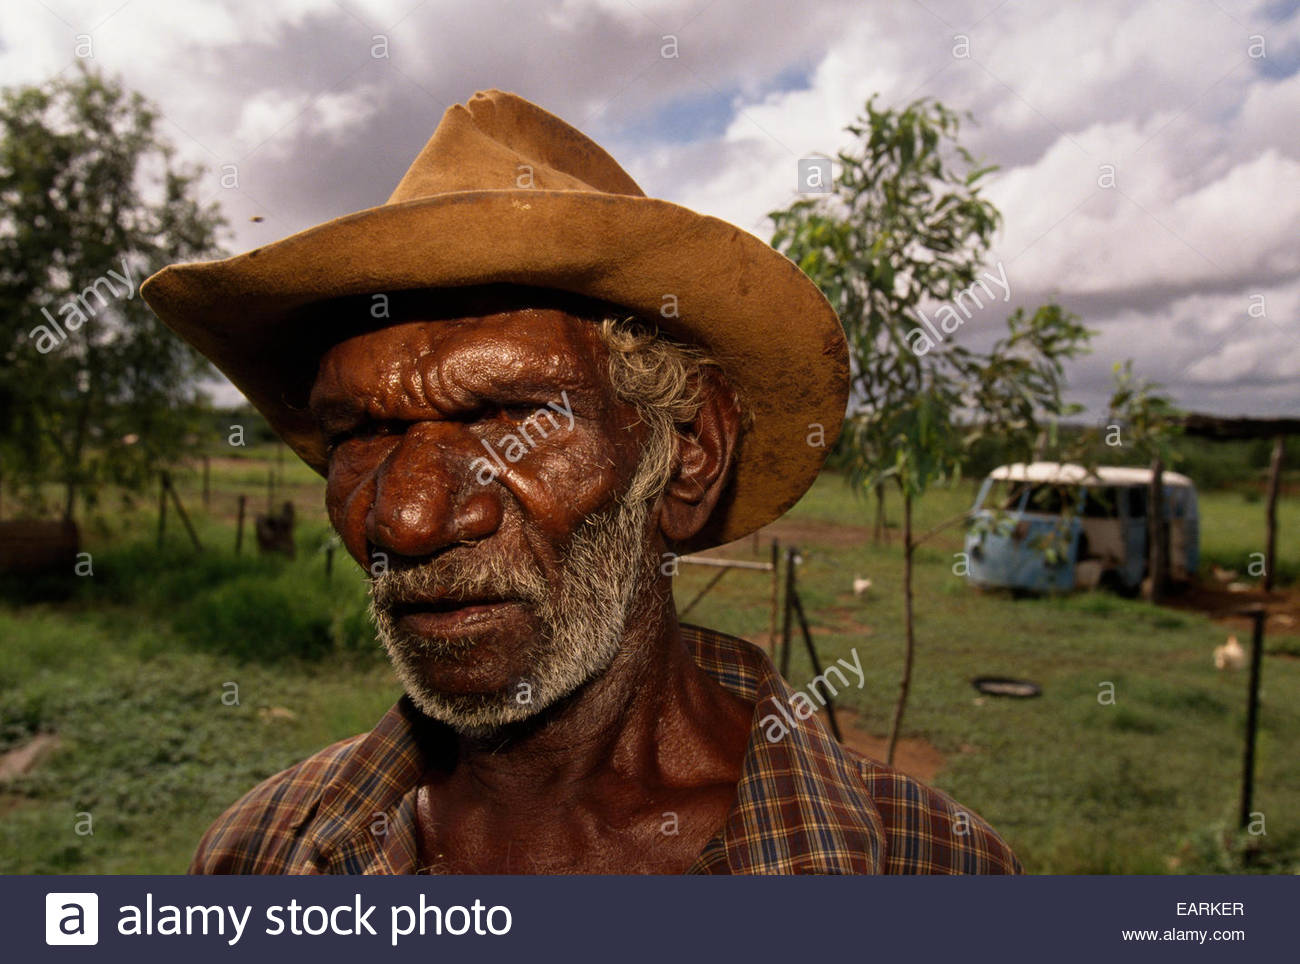 An Aboriginal man in the remote Australian Outback Stock Photo - Alamy